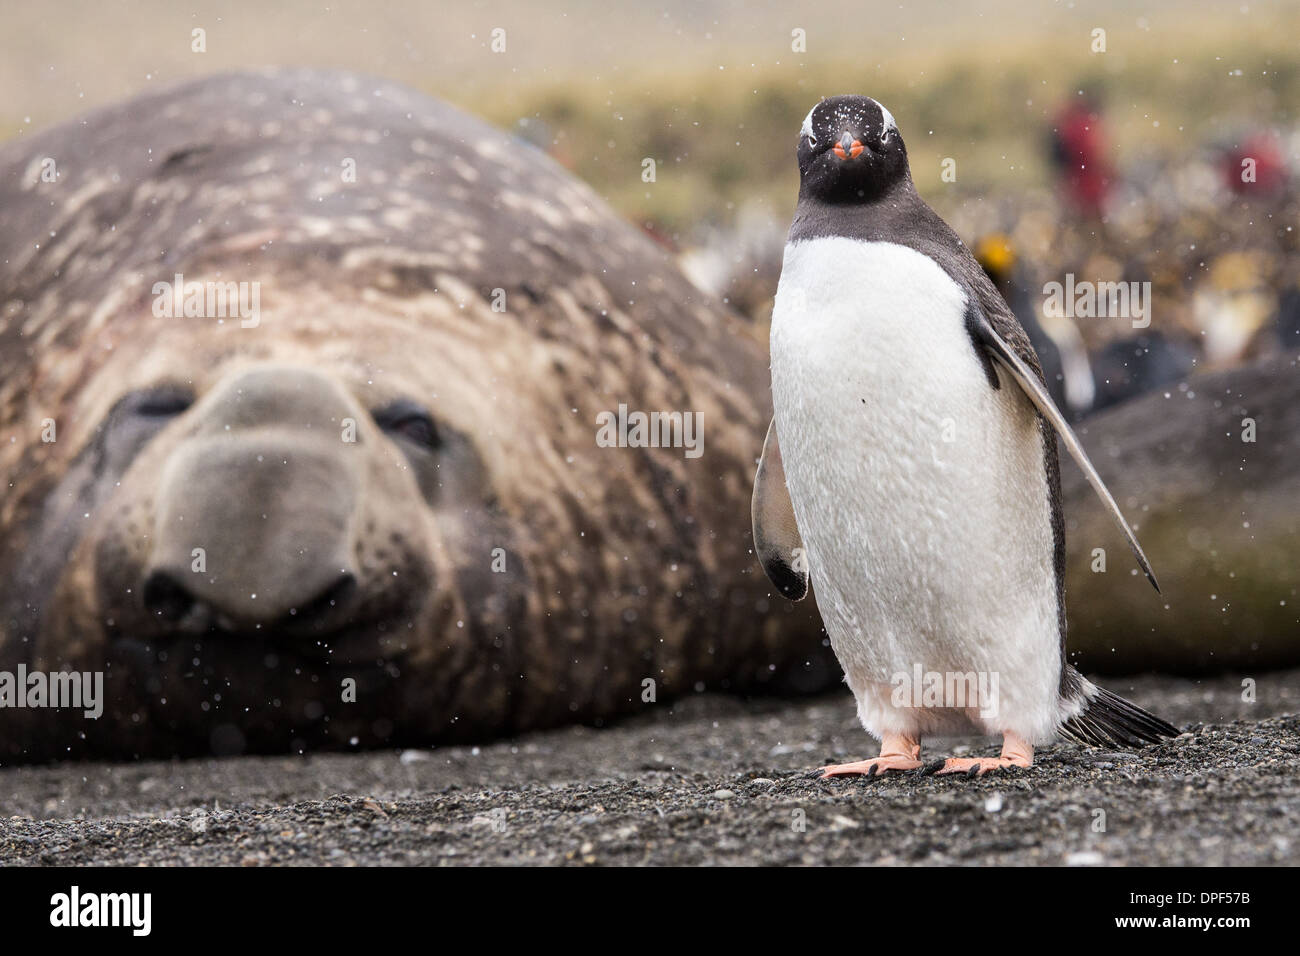 A gentoo penguin poses in front of a dozy elephant seal Stock Photo